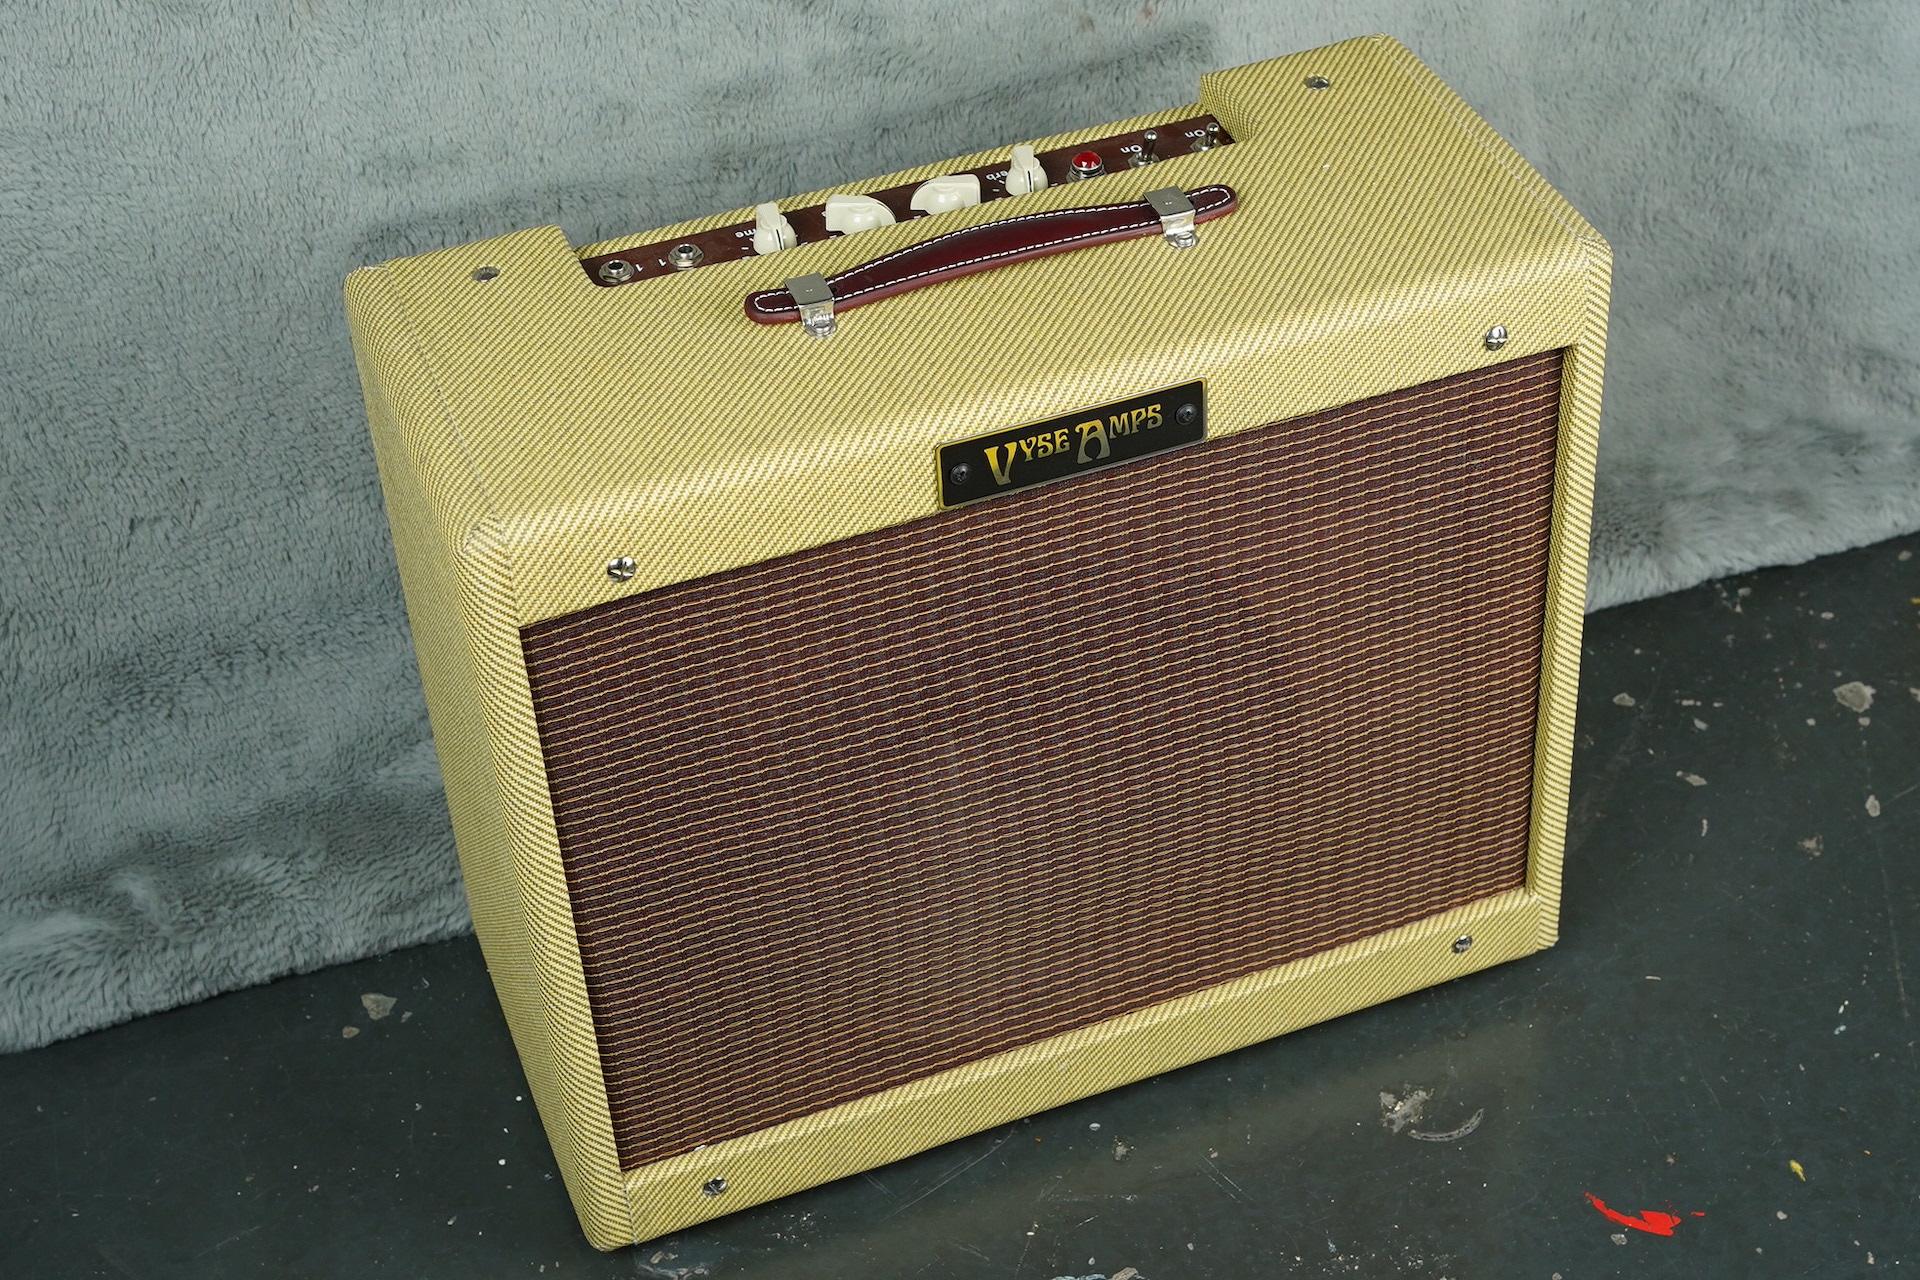 Vyse Amps Tweed Style Amplifier